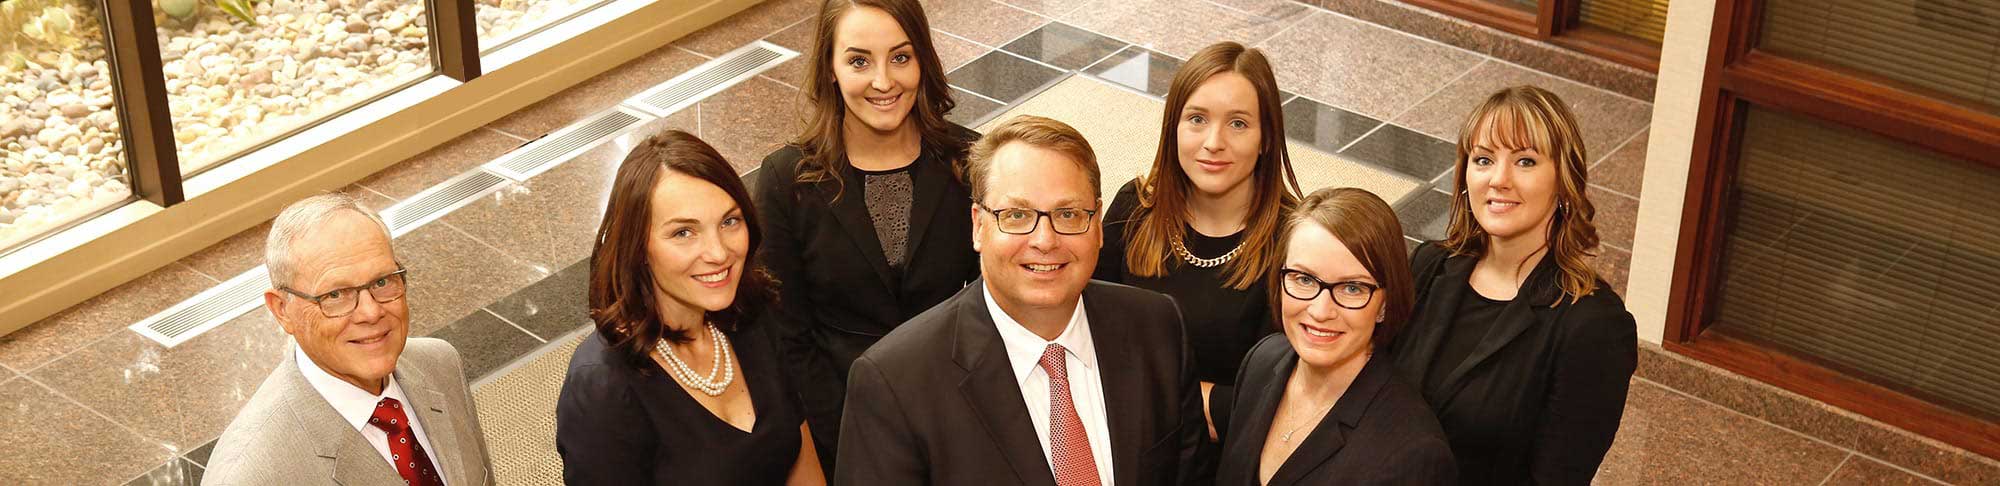 Group photo of the attorneys at Atkinson Gerber Law Office